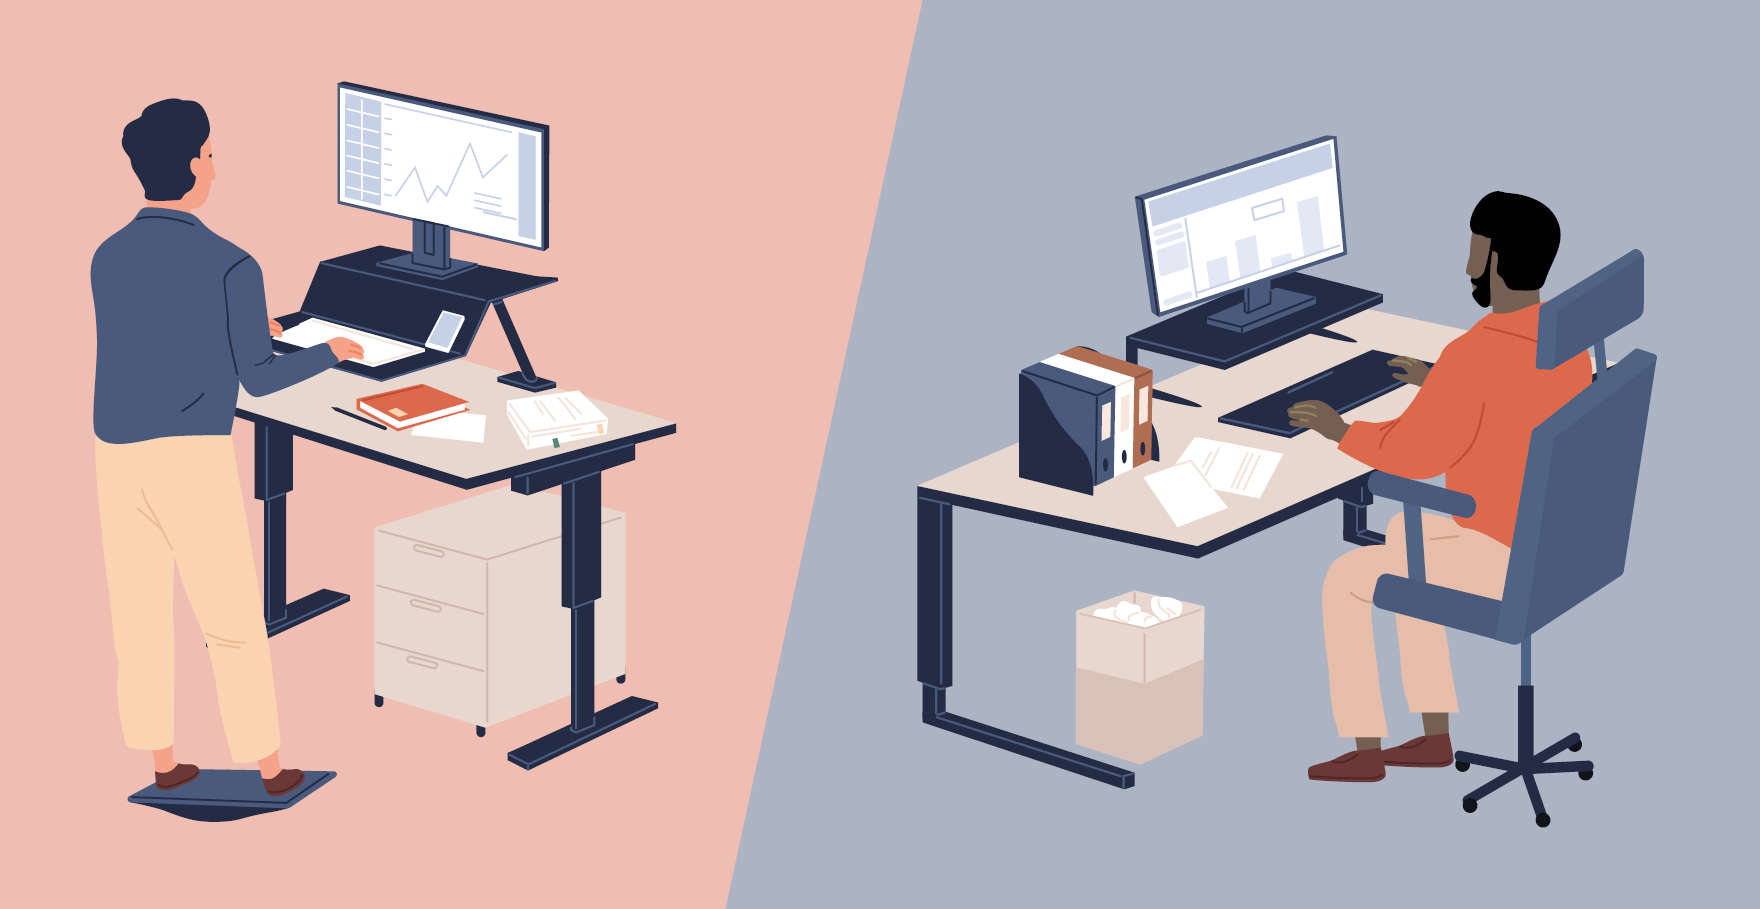 Illustration showing someone using a sit-stand desk versus someone using a fixed height desk